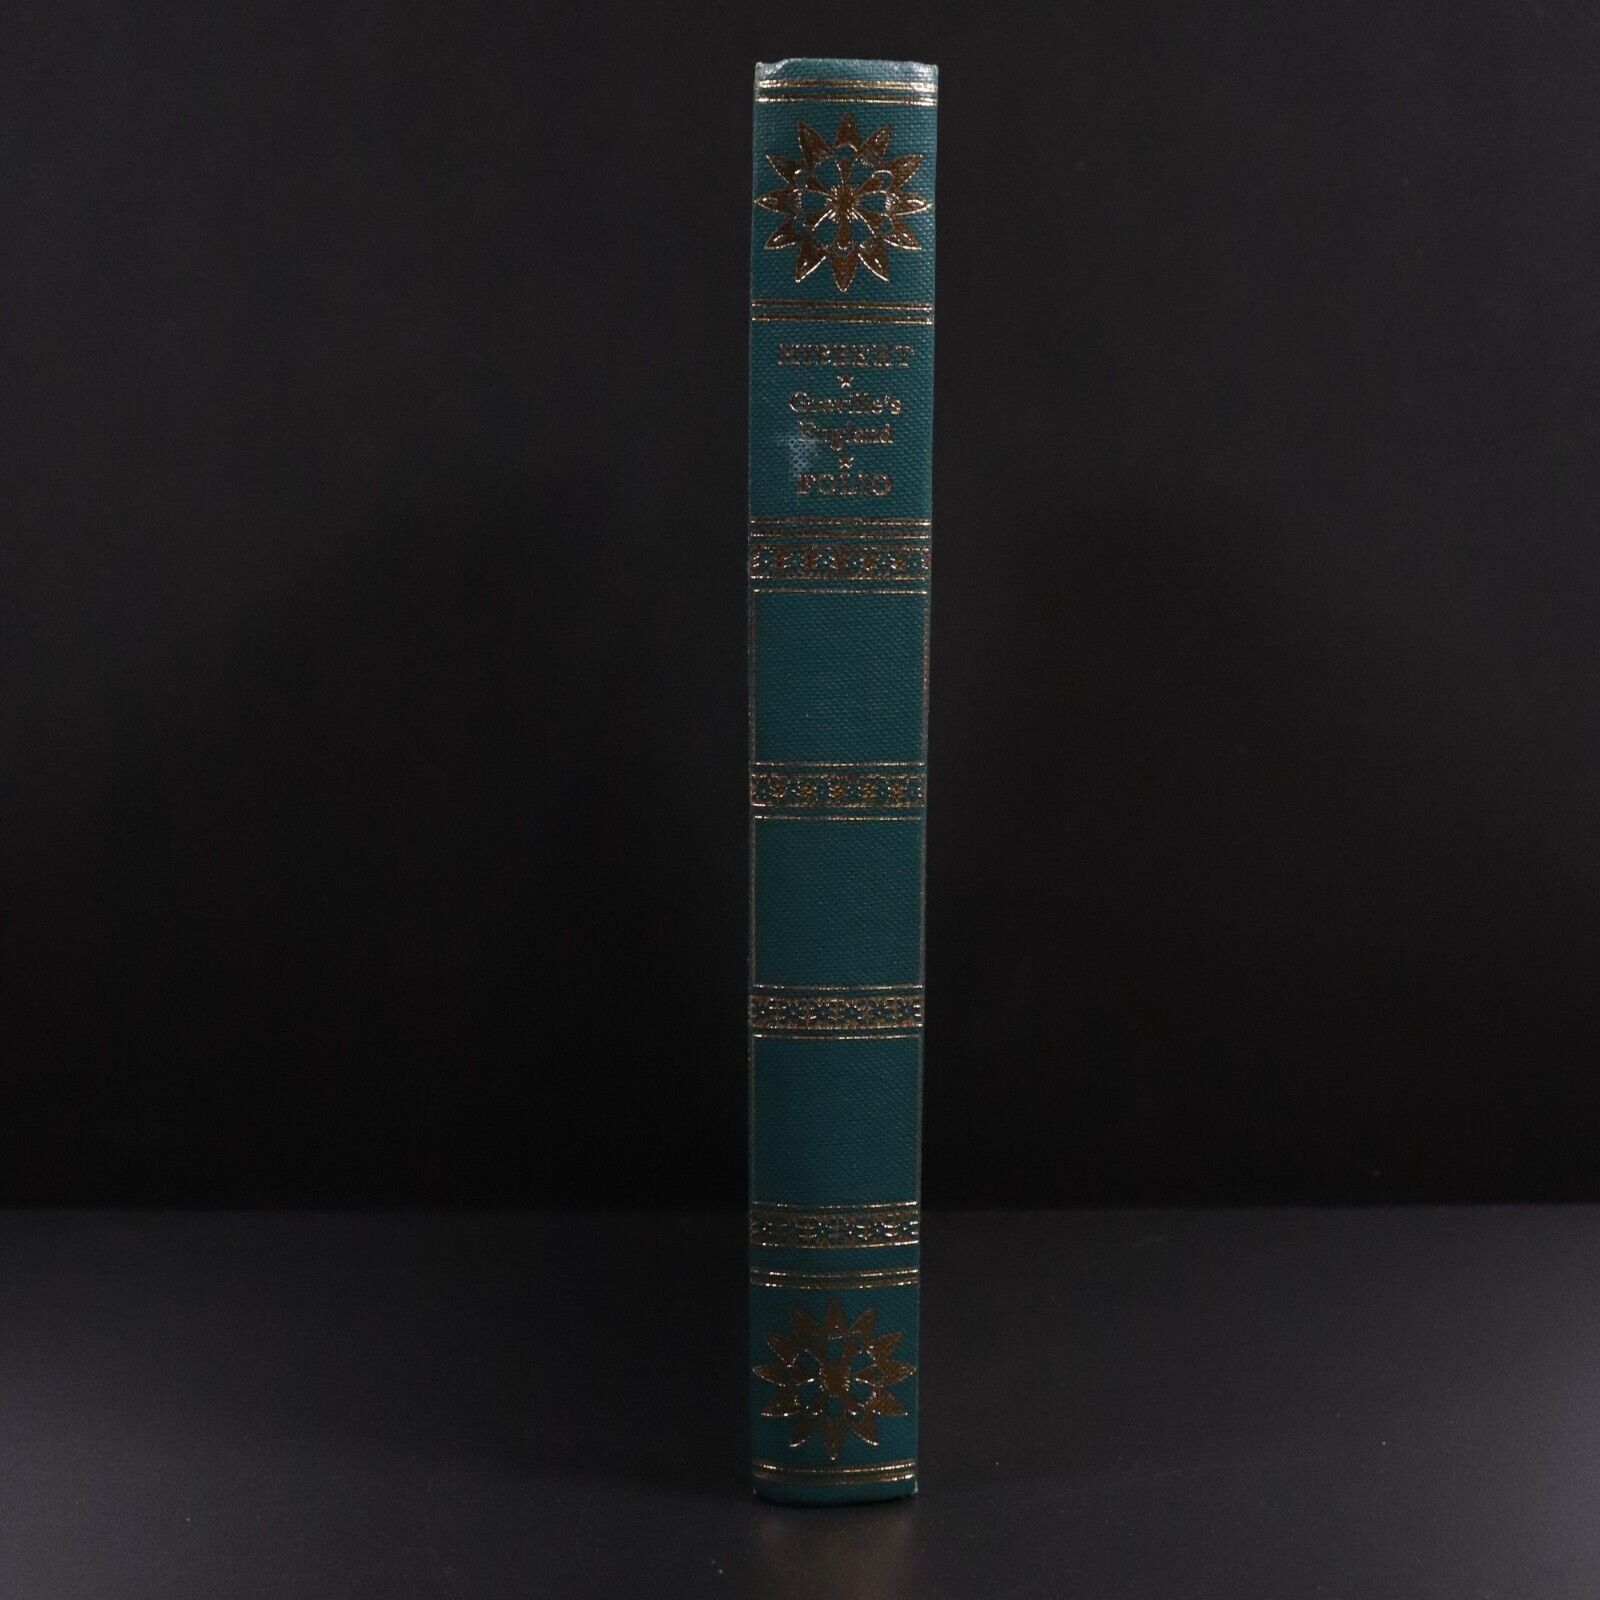 1981 Greville's England Diaries Of Charles Greville Folio Society History Book